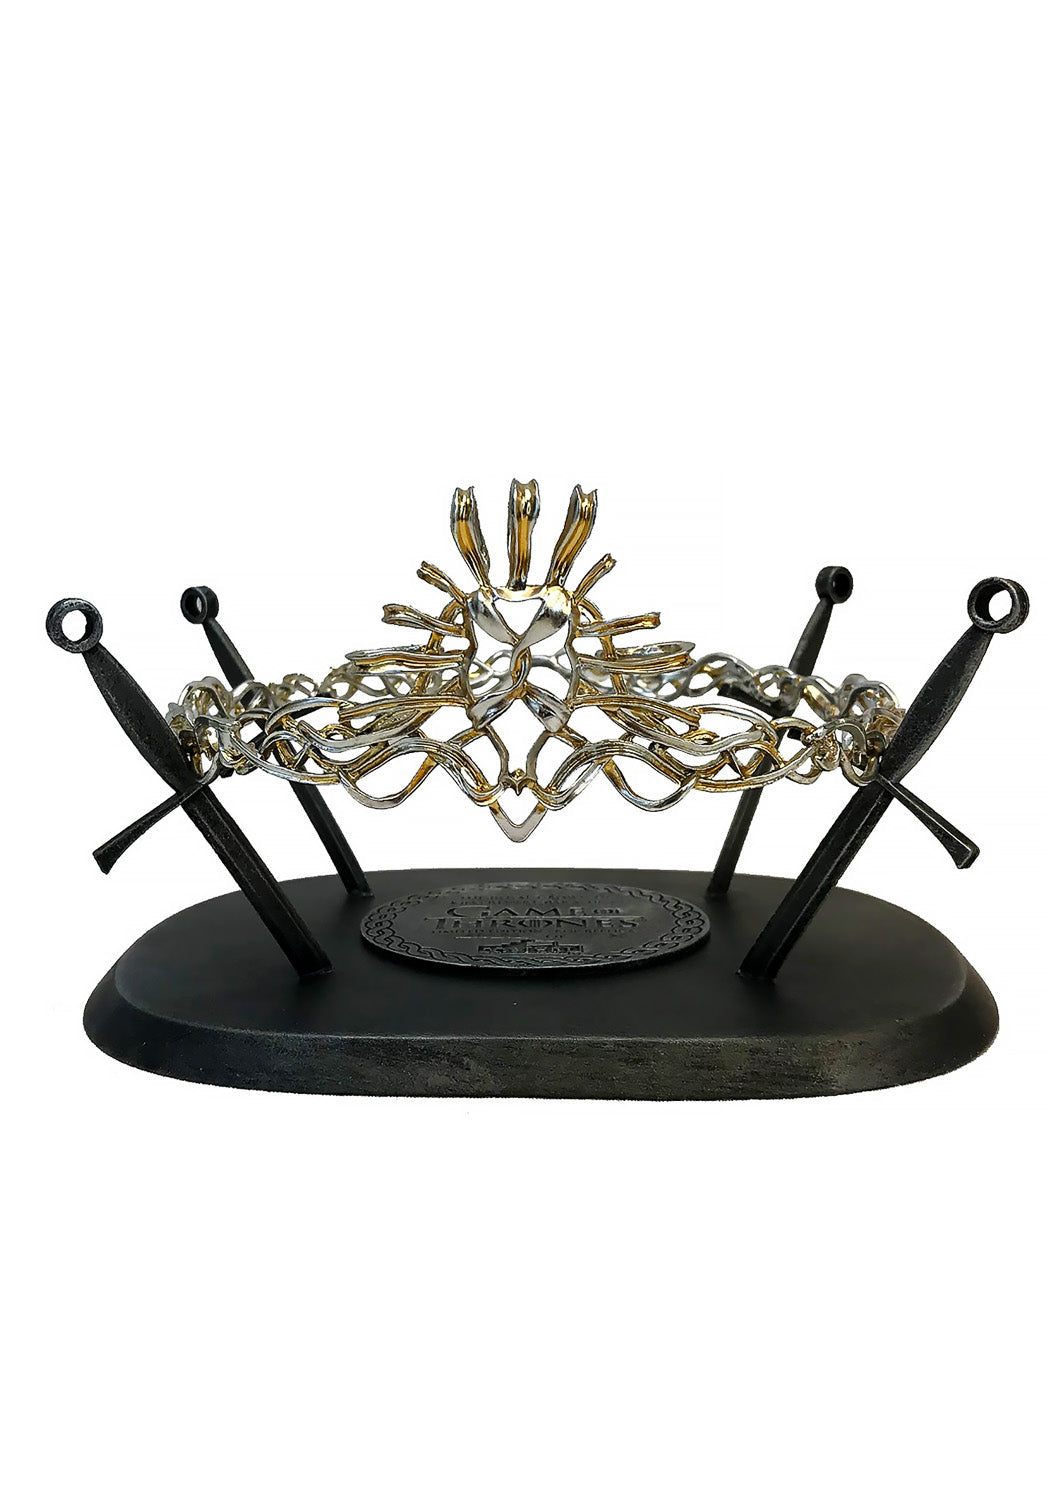 FACTORY ENTERTAINMENT GAME OF THRONES QUEEN CERSEI CROWN REPLICA LIMITED EDITION - 408524 - Anotoys Collectibles